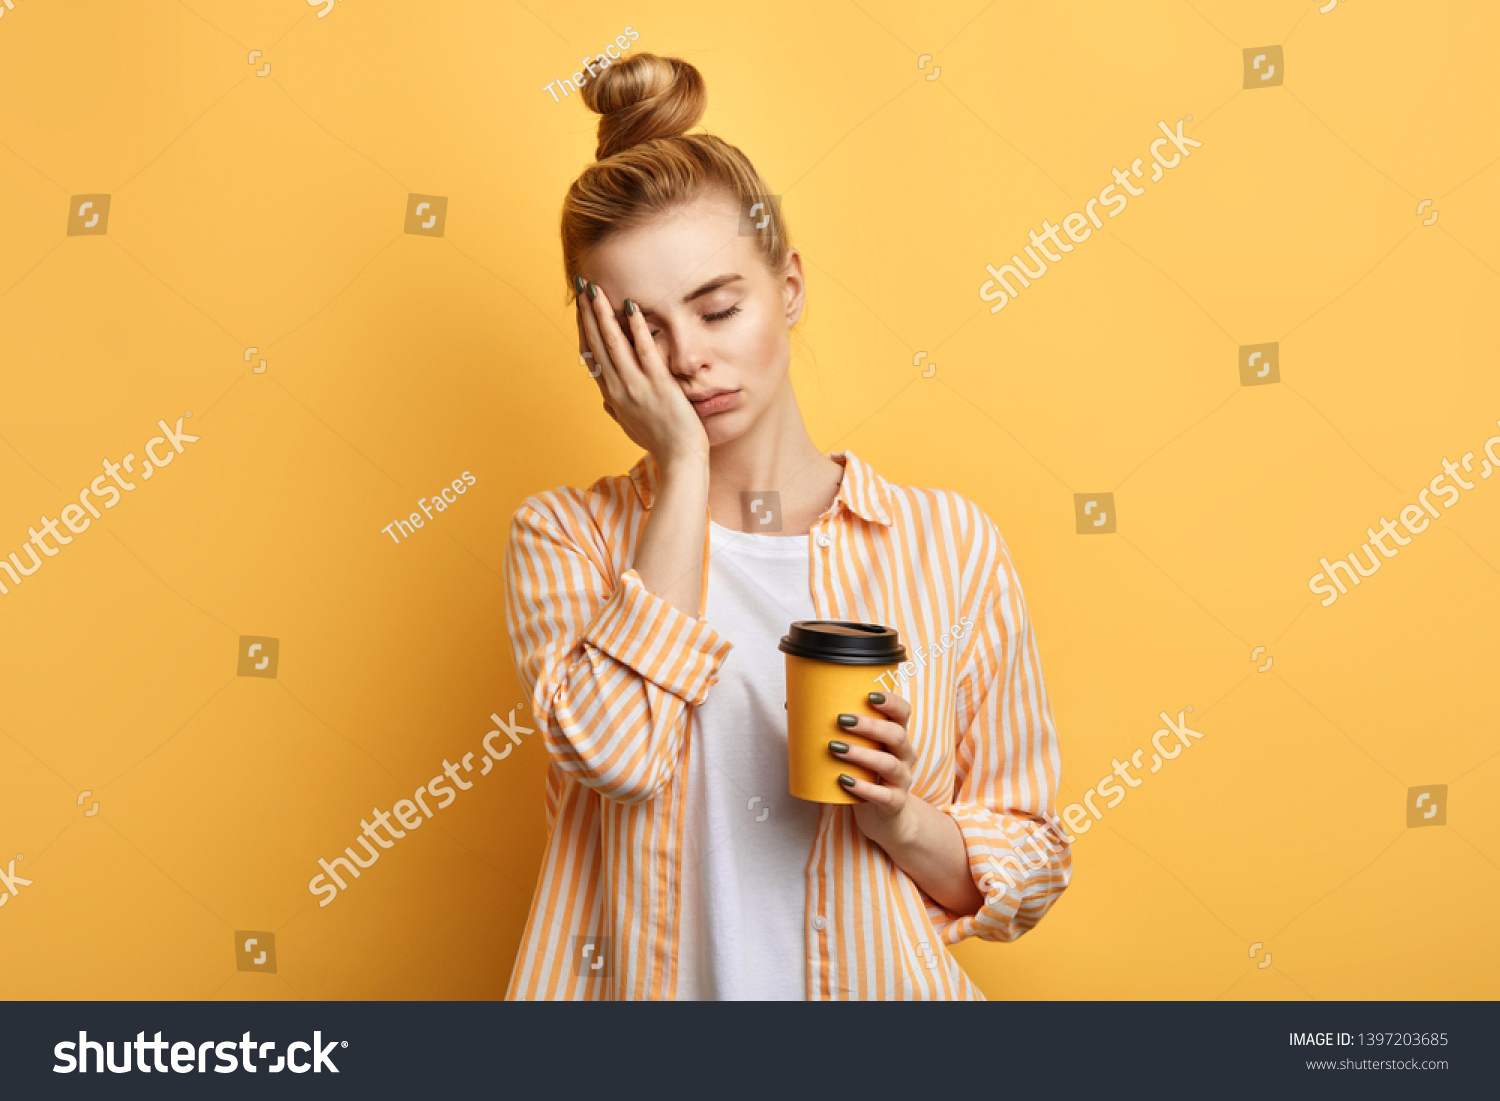 Tired sleepy woman holds a cup of coffee, has sad expression, closes eyes, cannot wake up in the morning and go to work. difficult, hard monday. isolated yellow background #1397203685